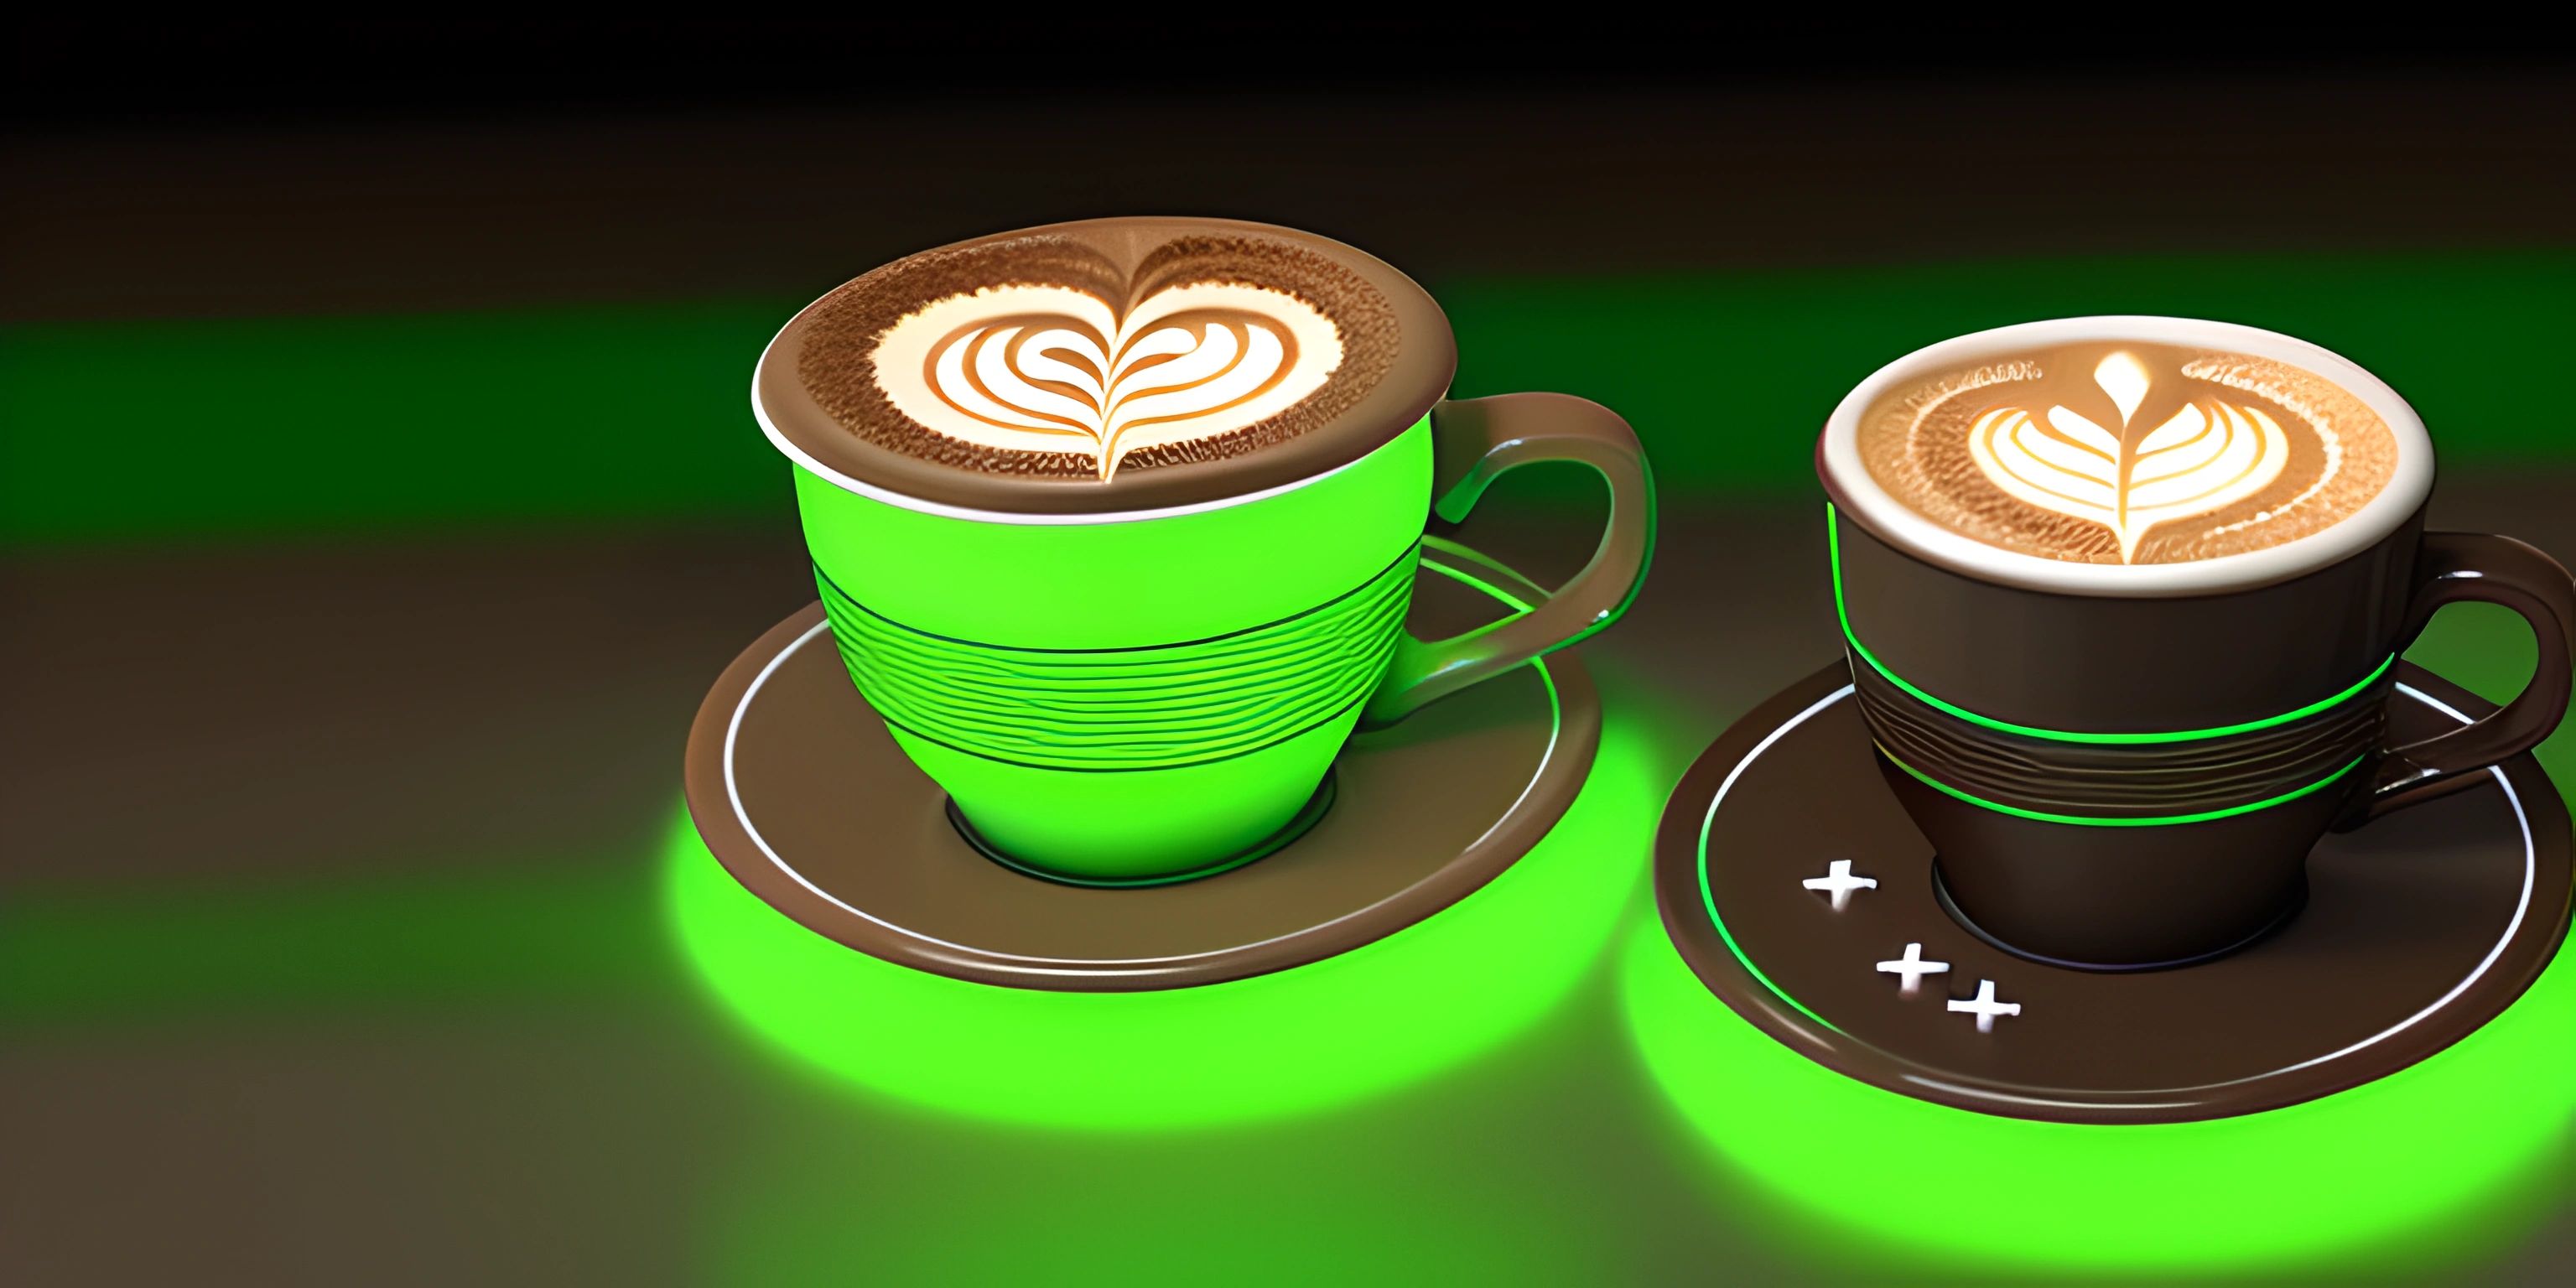 two green cups of coffee with a foam cup design on top of one cup, surrounded by a circular saucer and a white plate with a black band